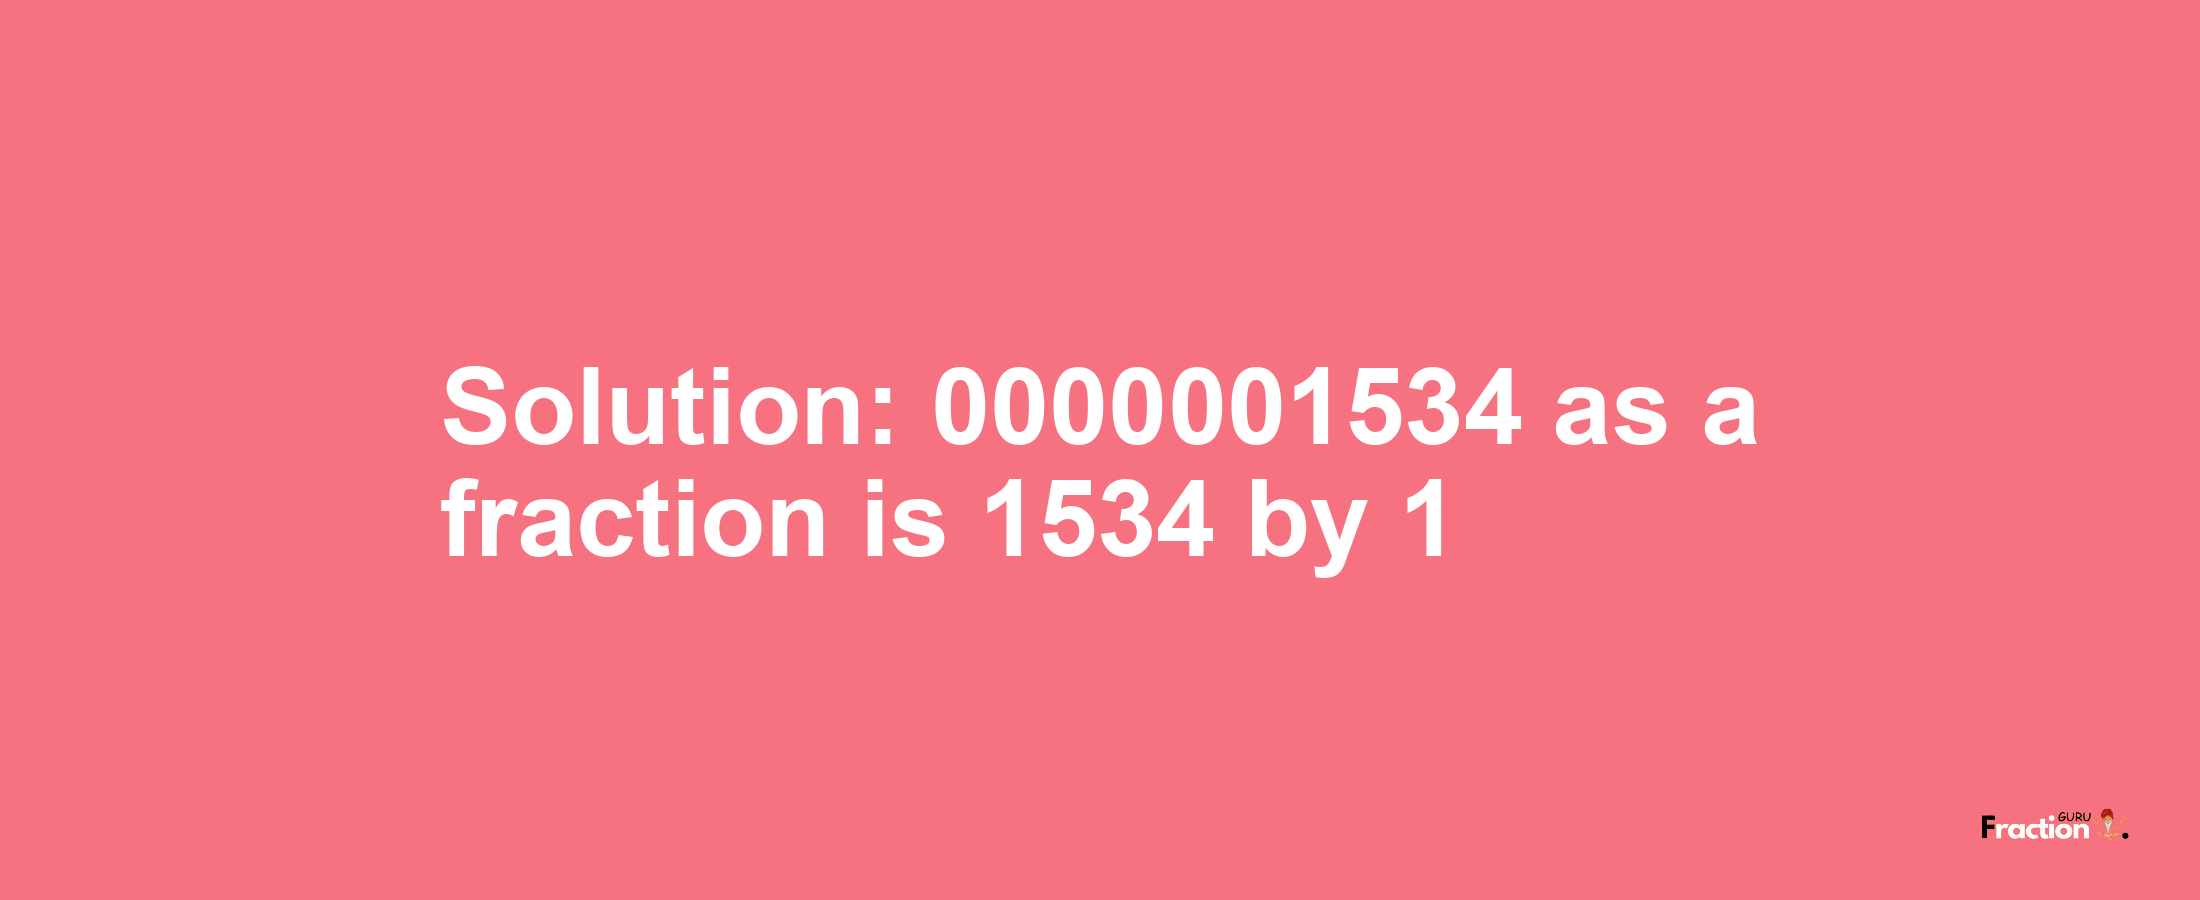 Solution:0000001534 as a fraction is 1534/1